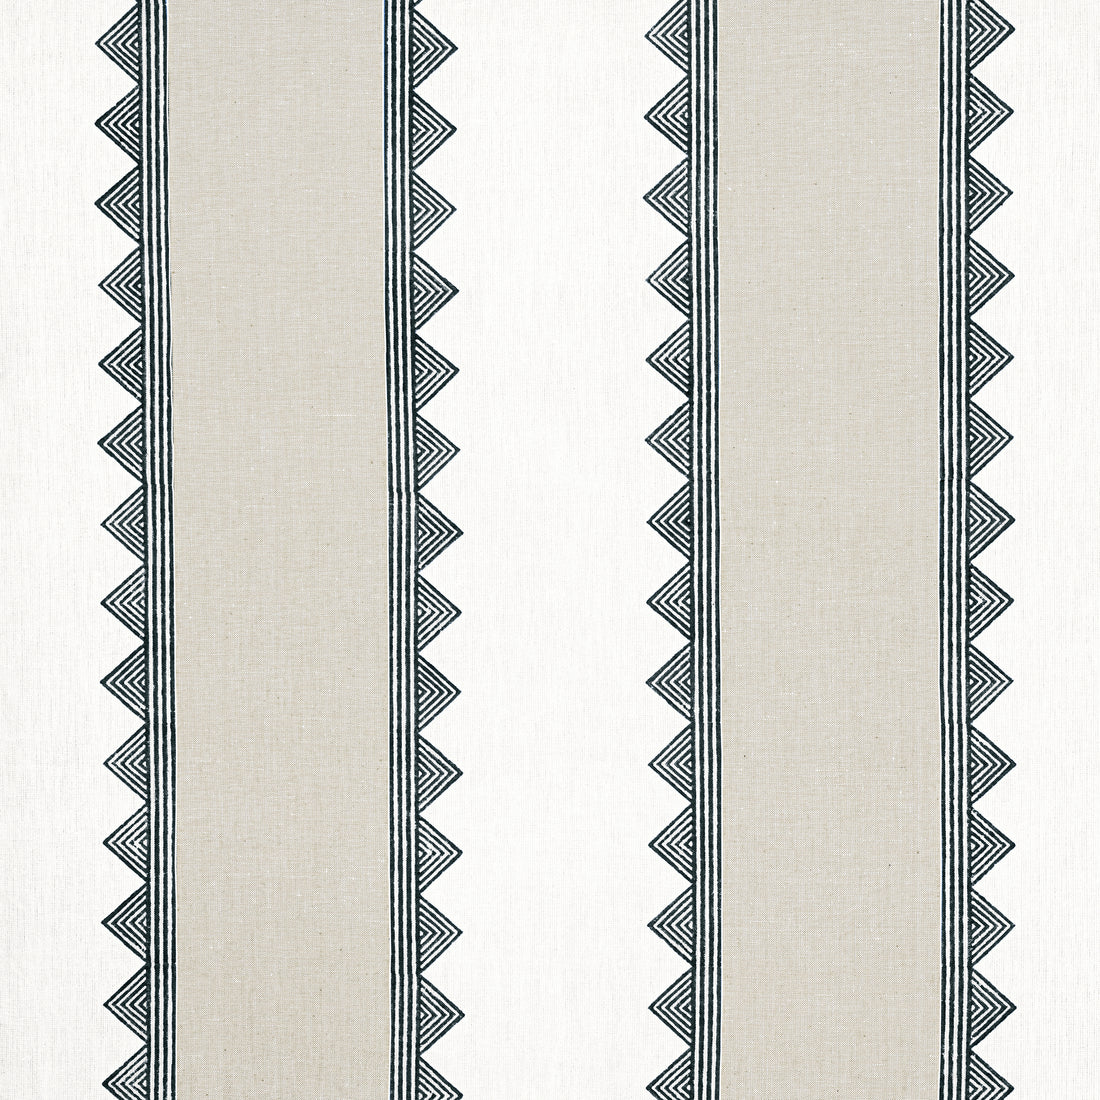 Kismet Stripe fabric in black color - pattern number F916232 - by Thibaut in the Kismet collection